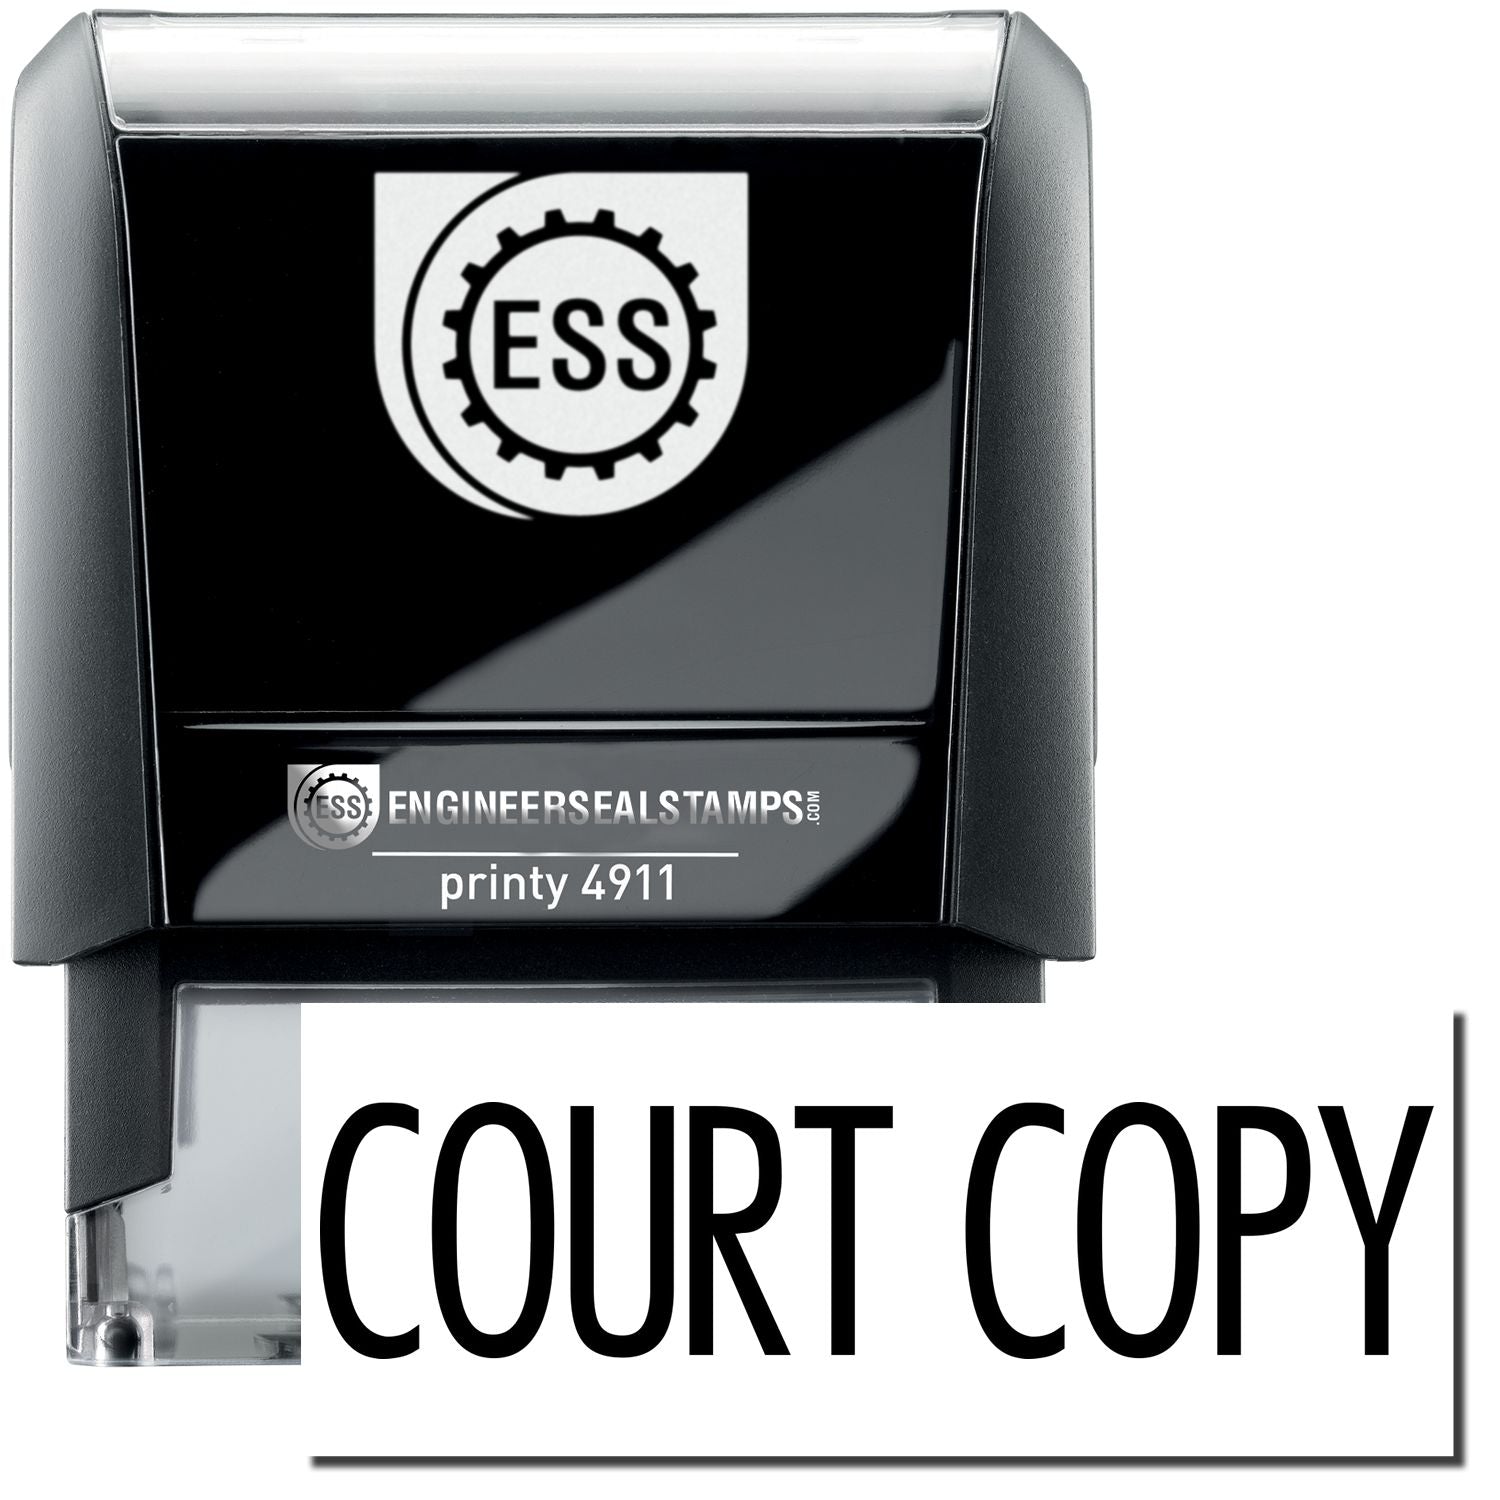 A self-inking stamp with a stamped image showing how the text "COURT COPY" in a narrow font is displayed after stamping.